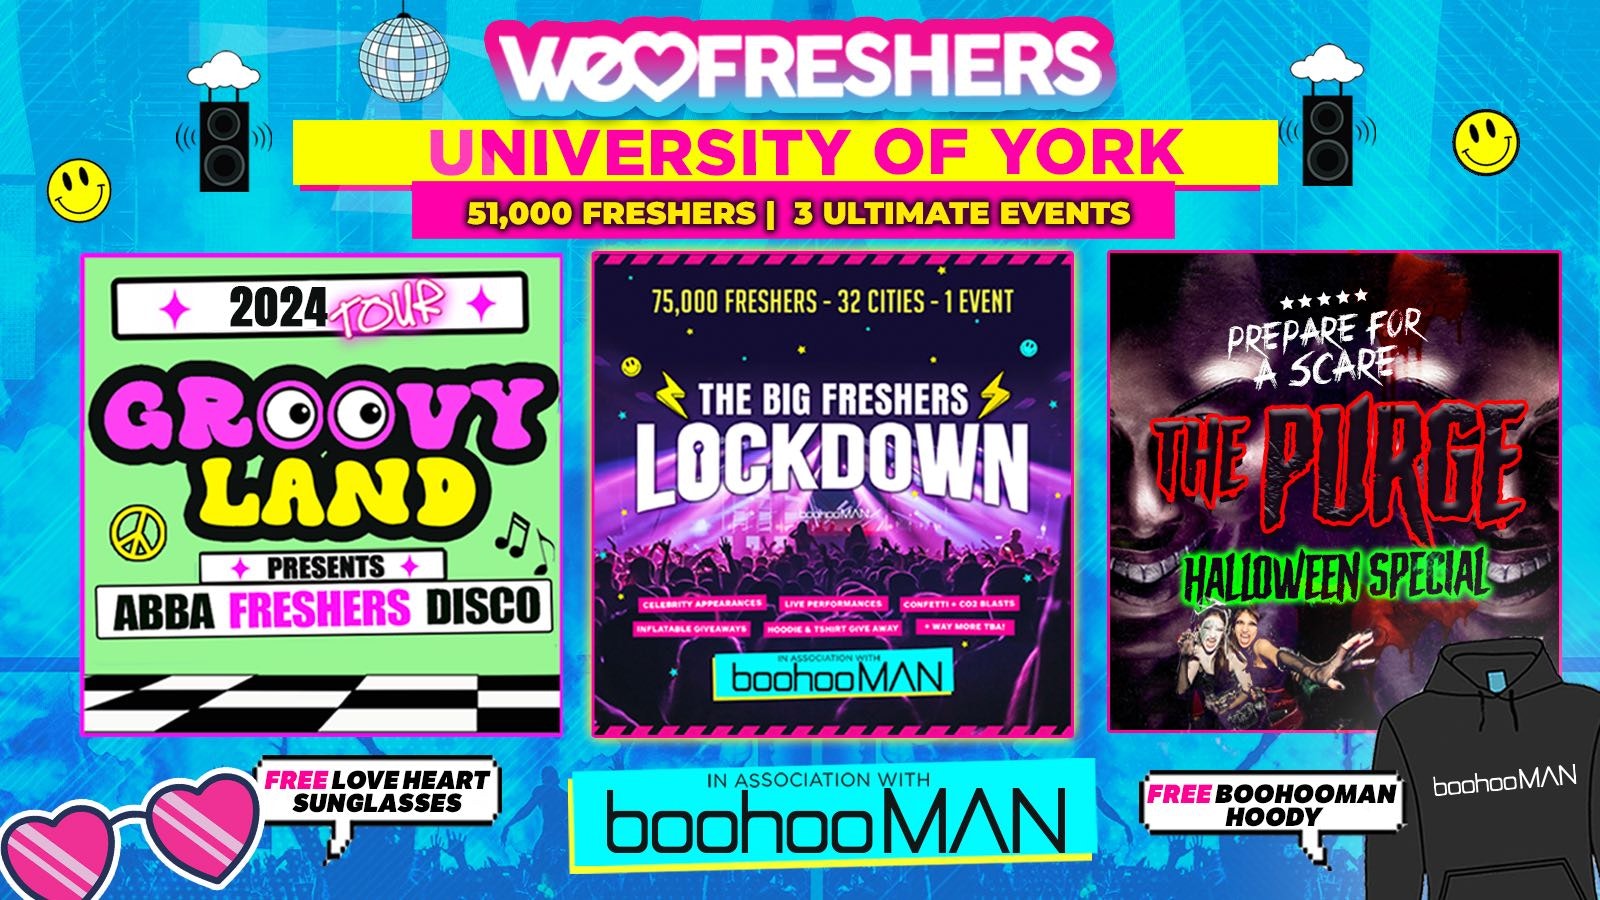 WE LOVE – UNI OF YORK FRESHERS 2024 in association with boohooMAN ❗FREE BOOHOOMAN HOODIE TODAY ONLY❗